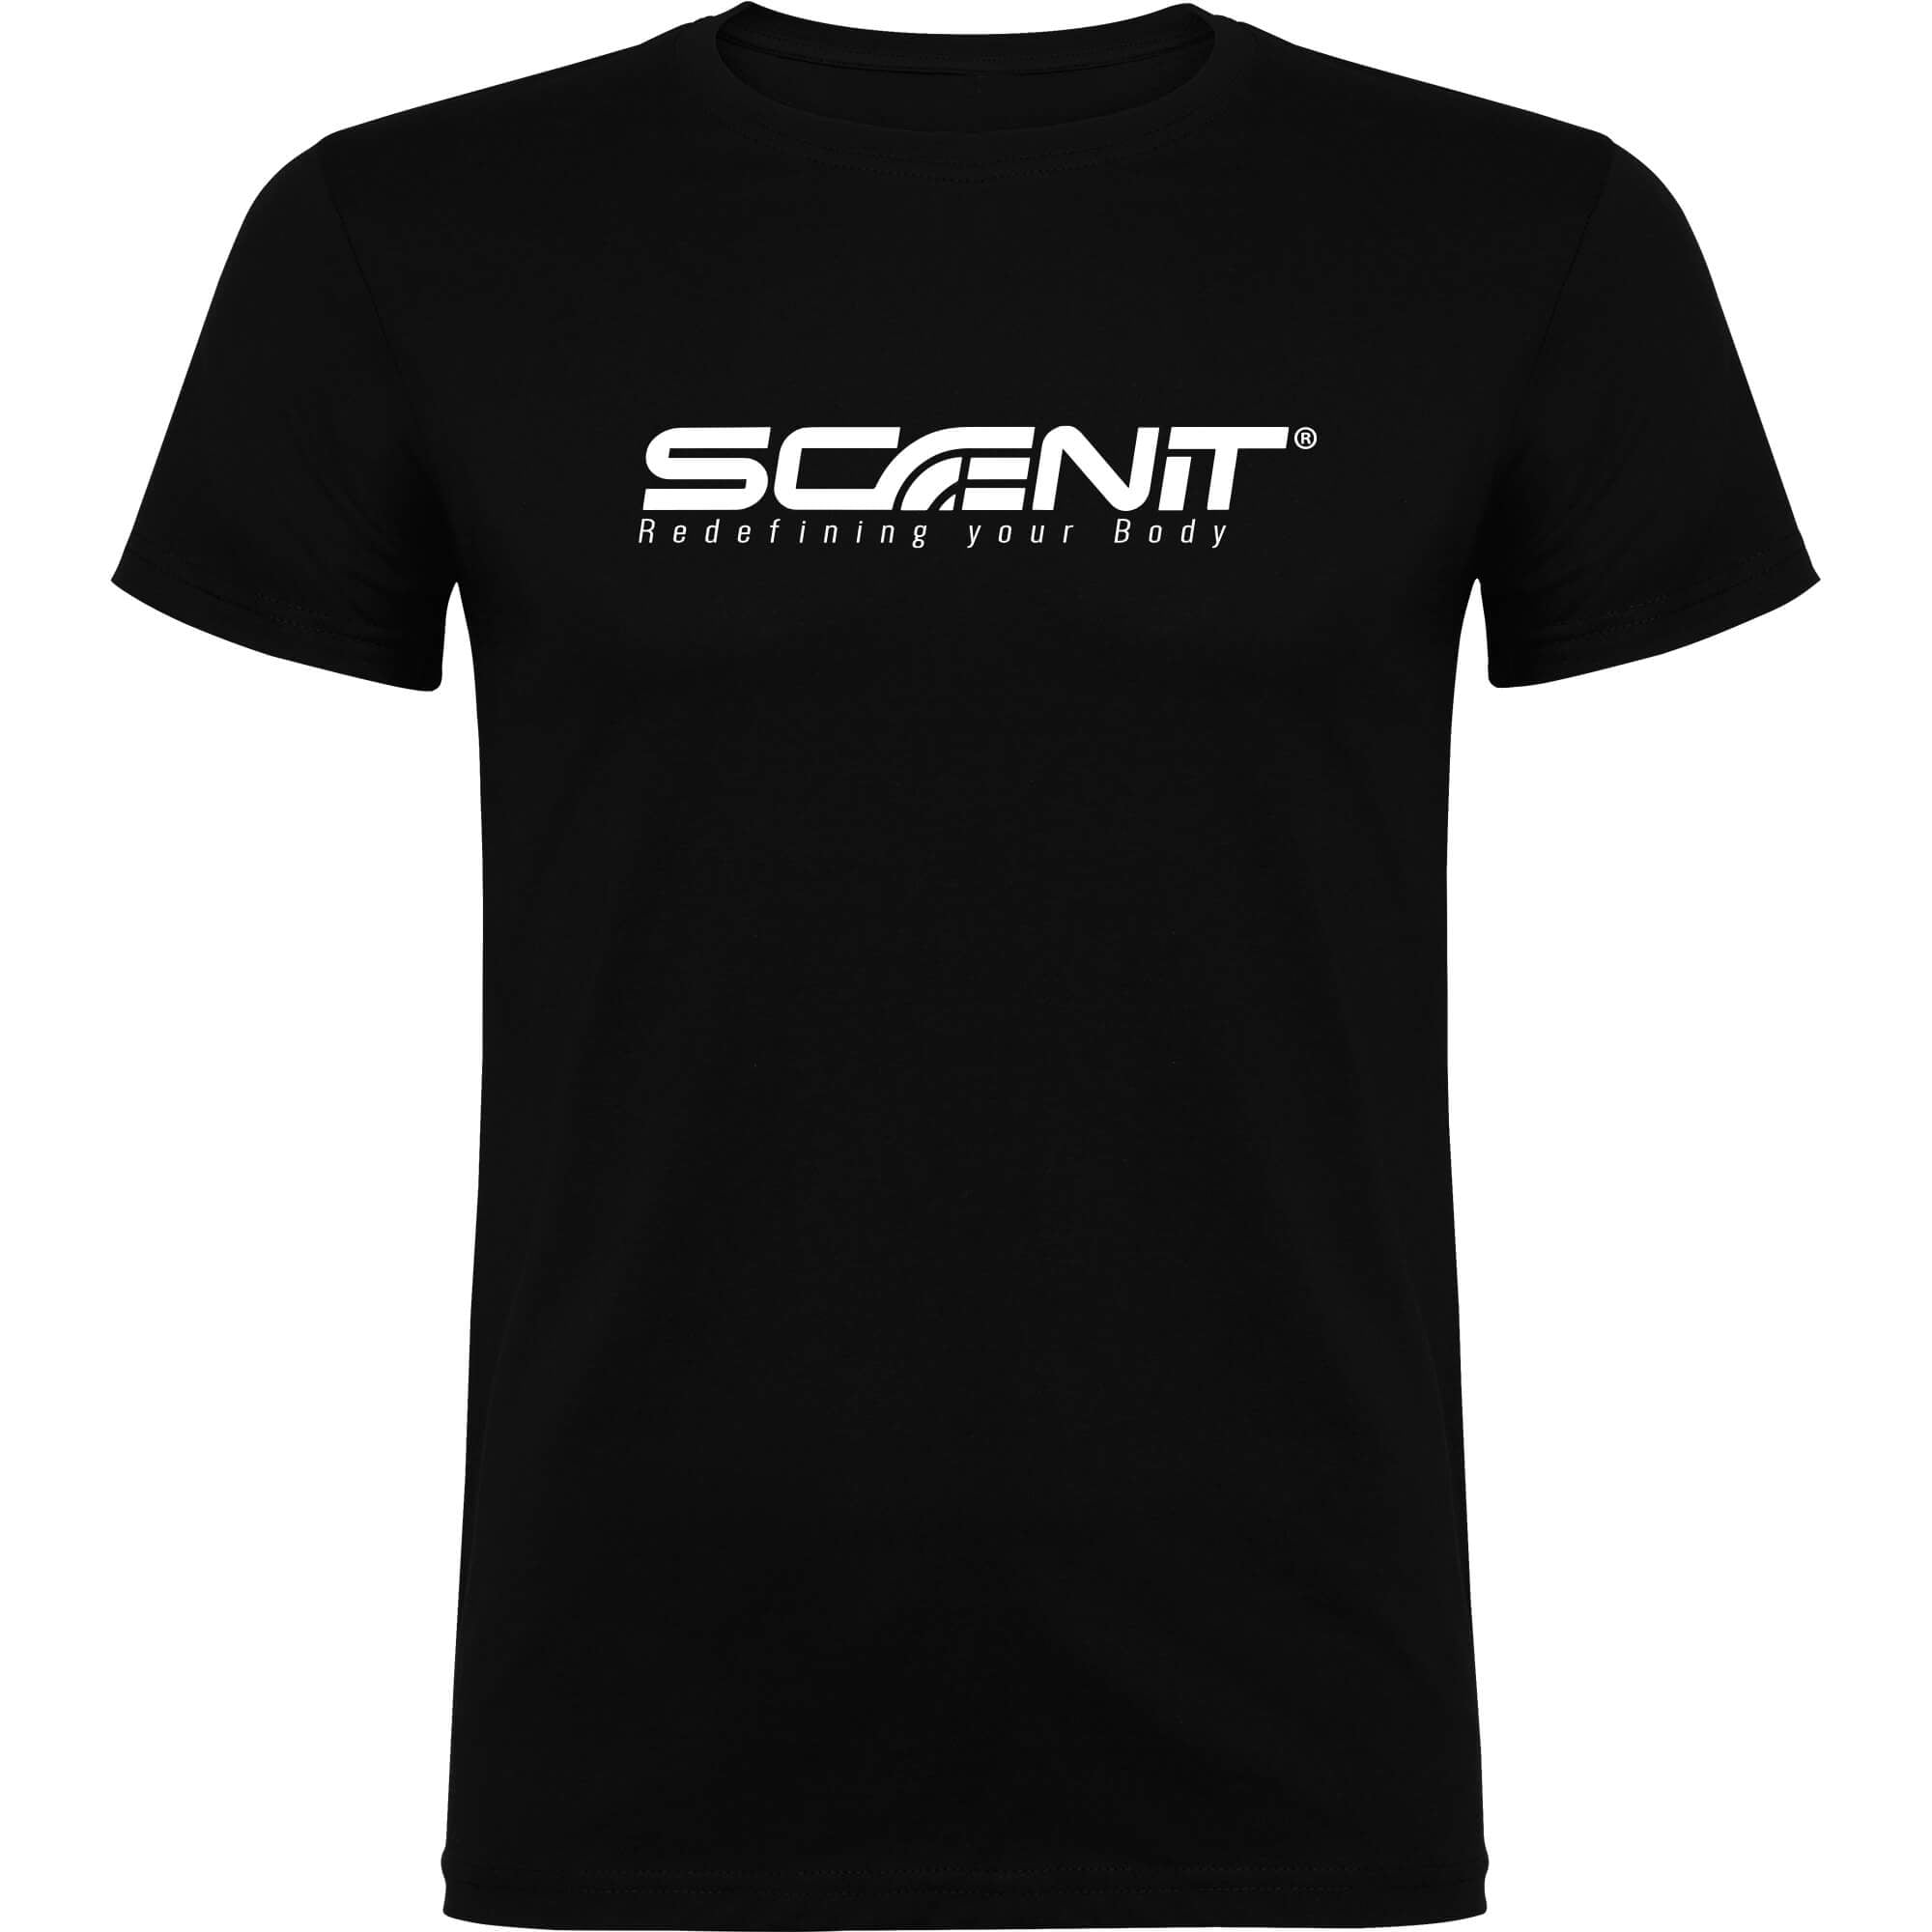 Short-sleeved T-shirt (3 colors)